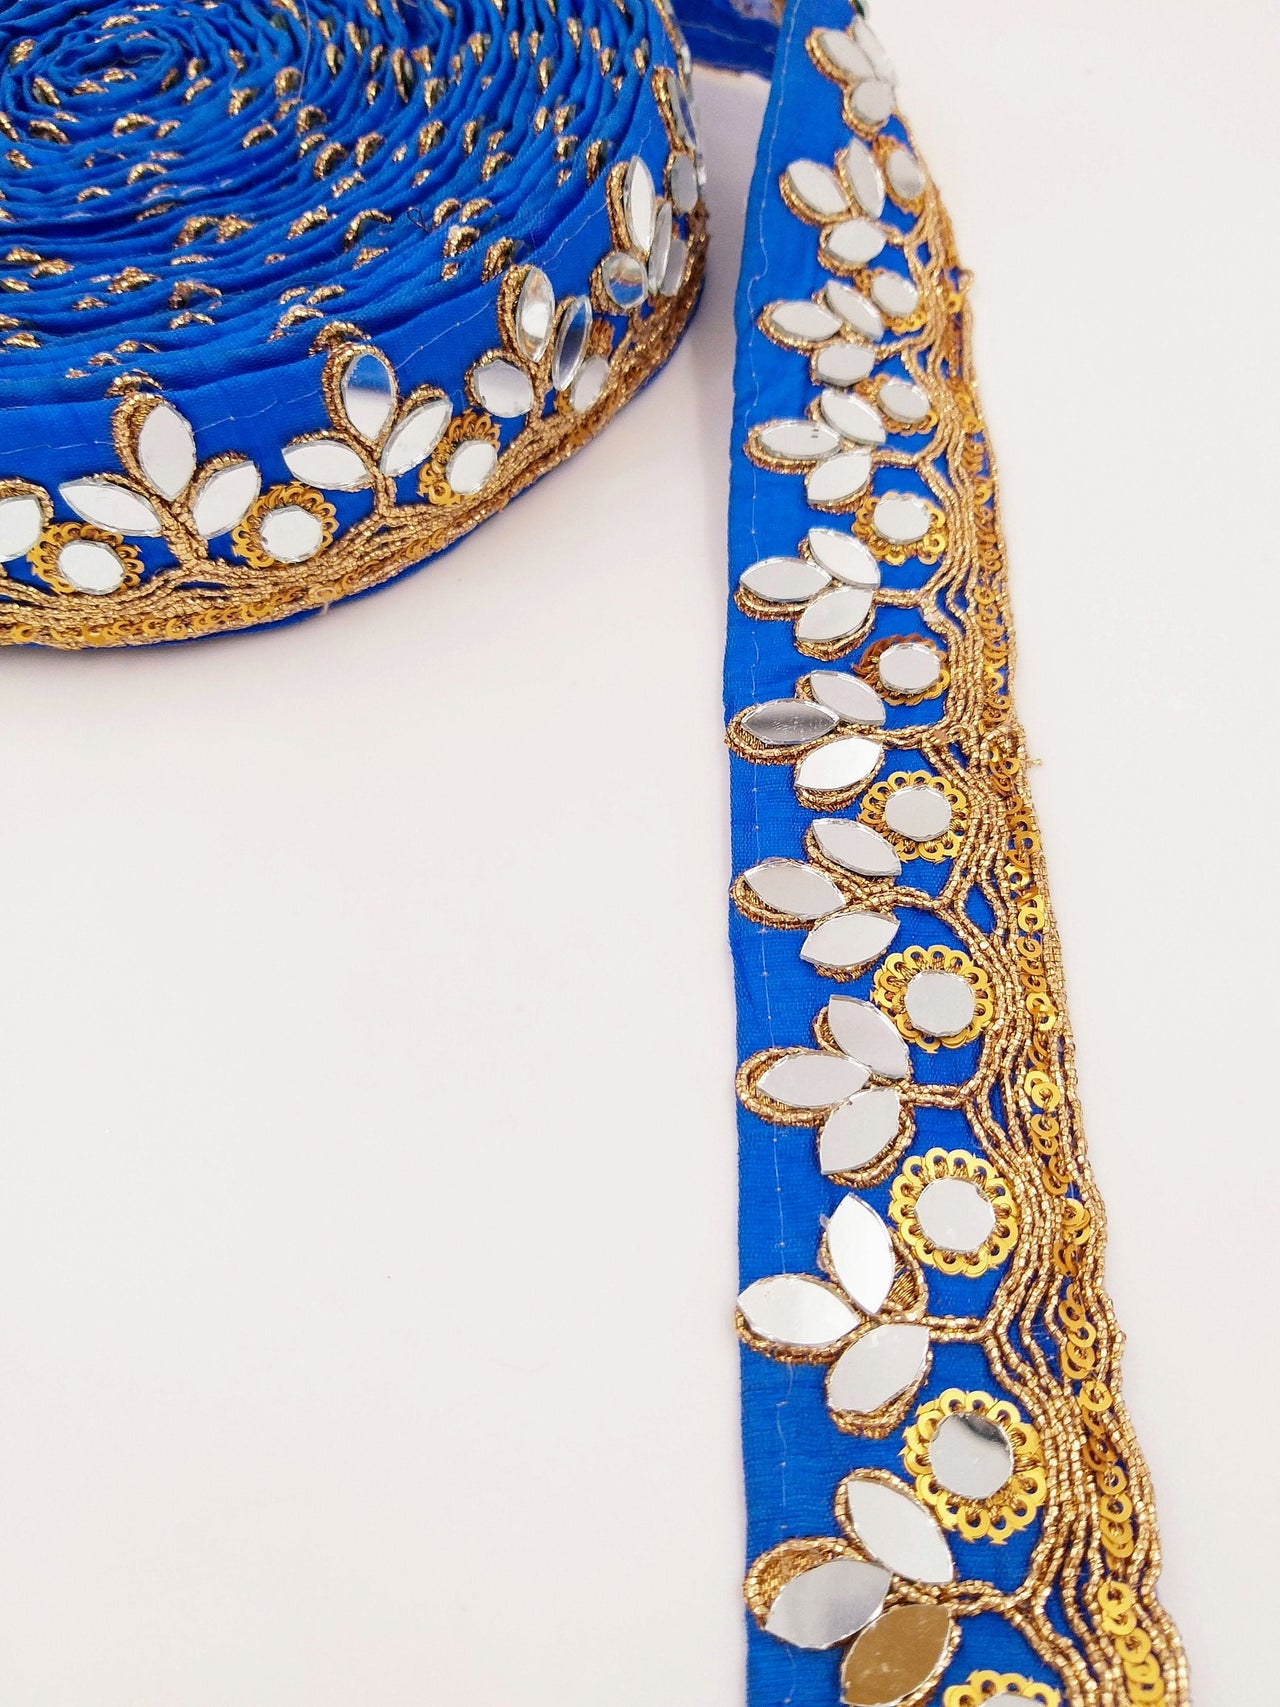 Royal Blue Silk Trim With Mirrors Embellishments and Gold Embroidery, Approx. 34mm Wide, Decorative Trim Costume Trim Fashion Trim By Yard